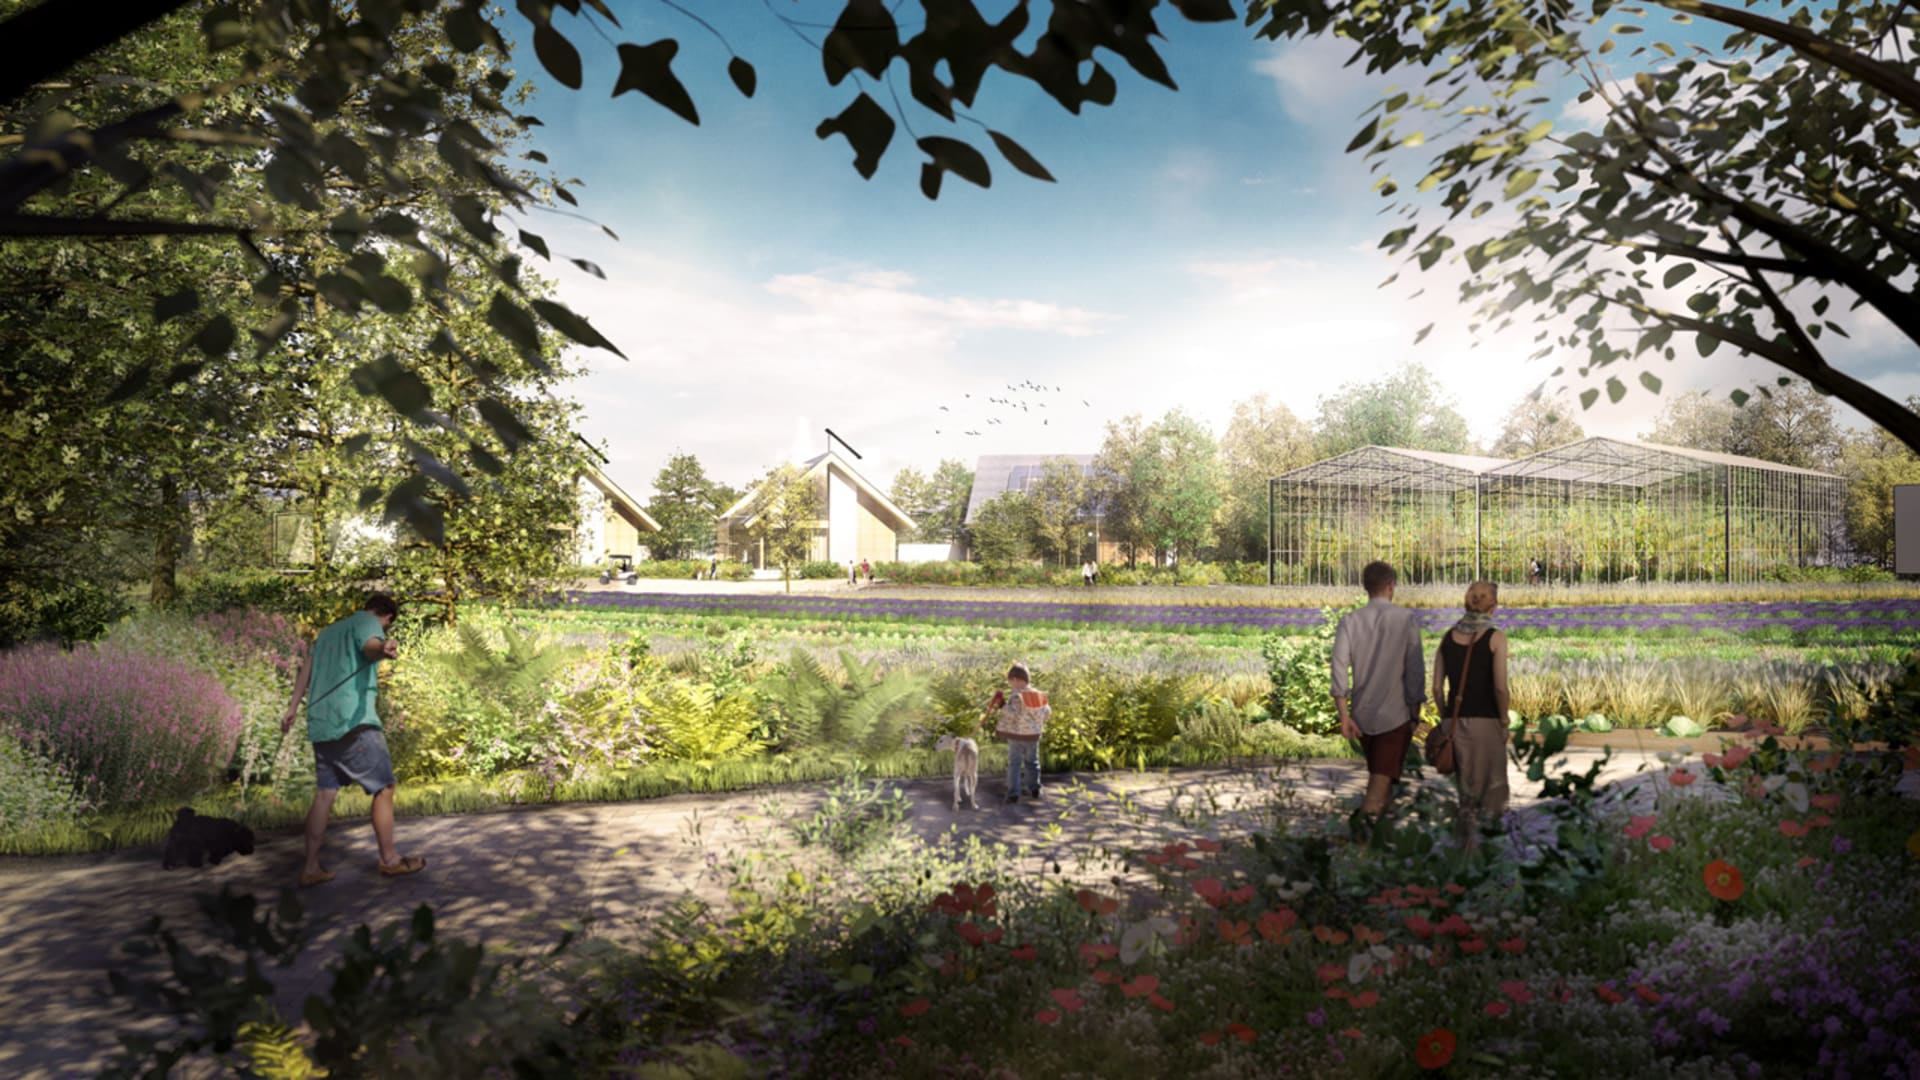 The world’s first “high-tech eco village” will reinvent suburbs